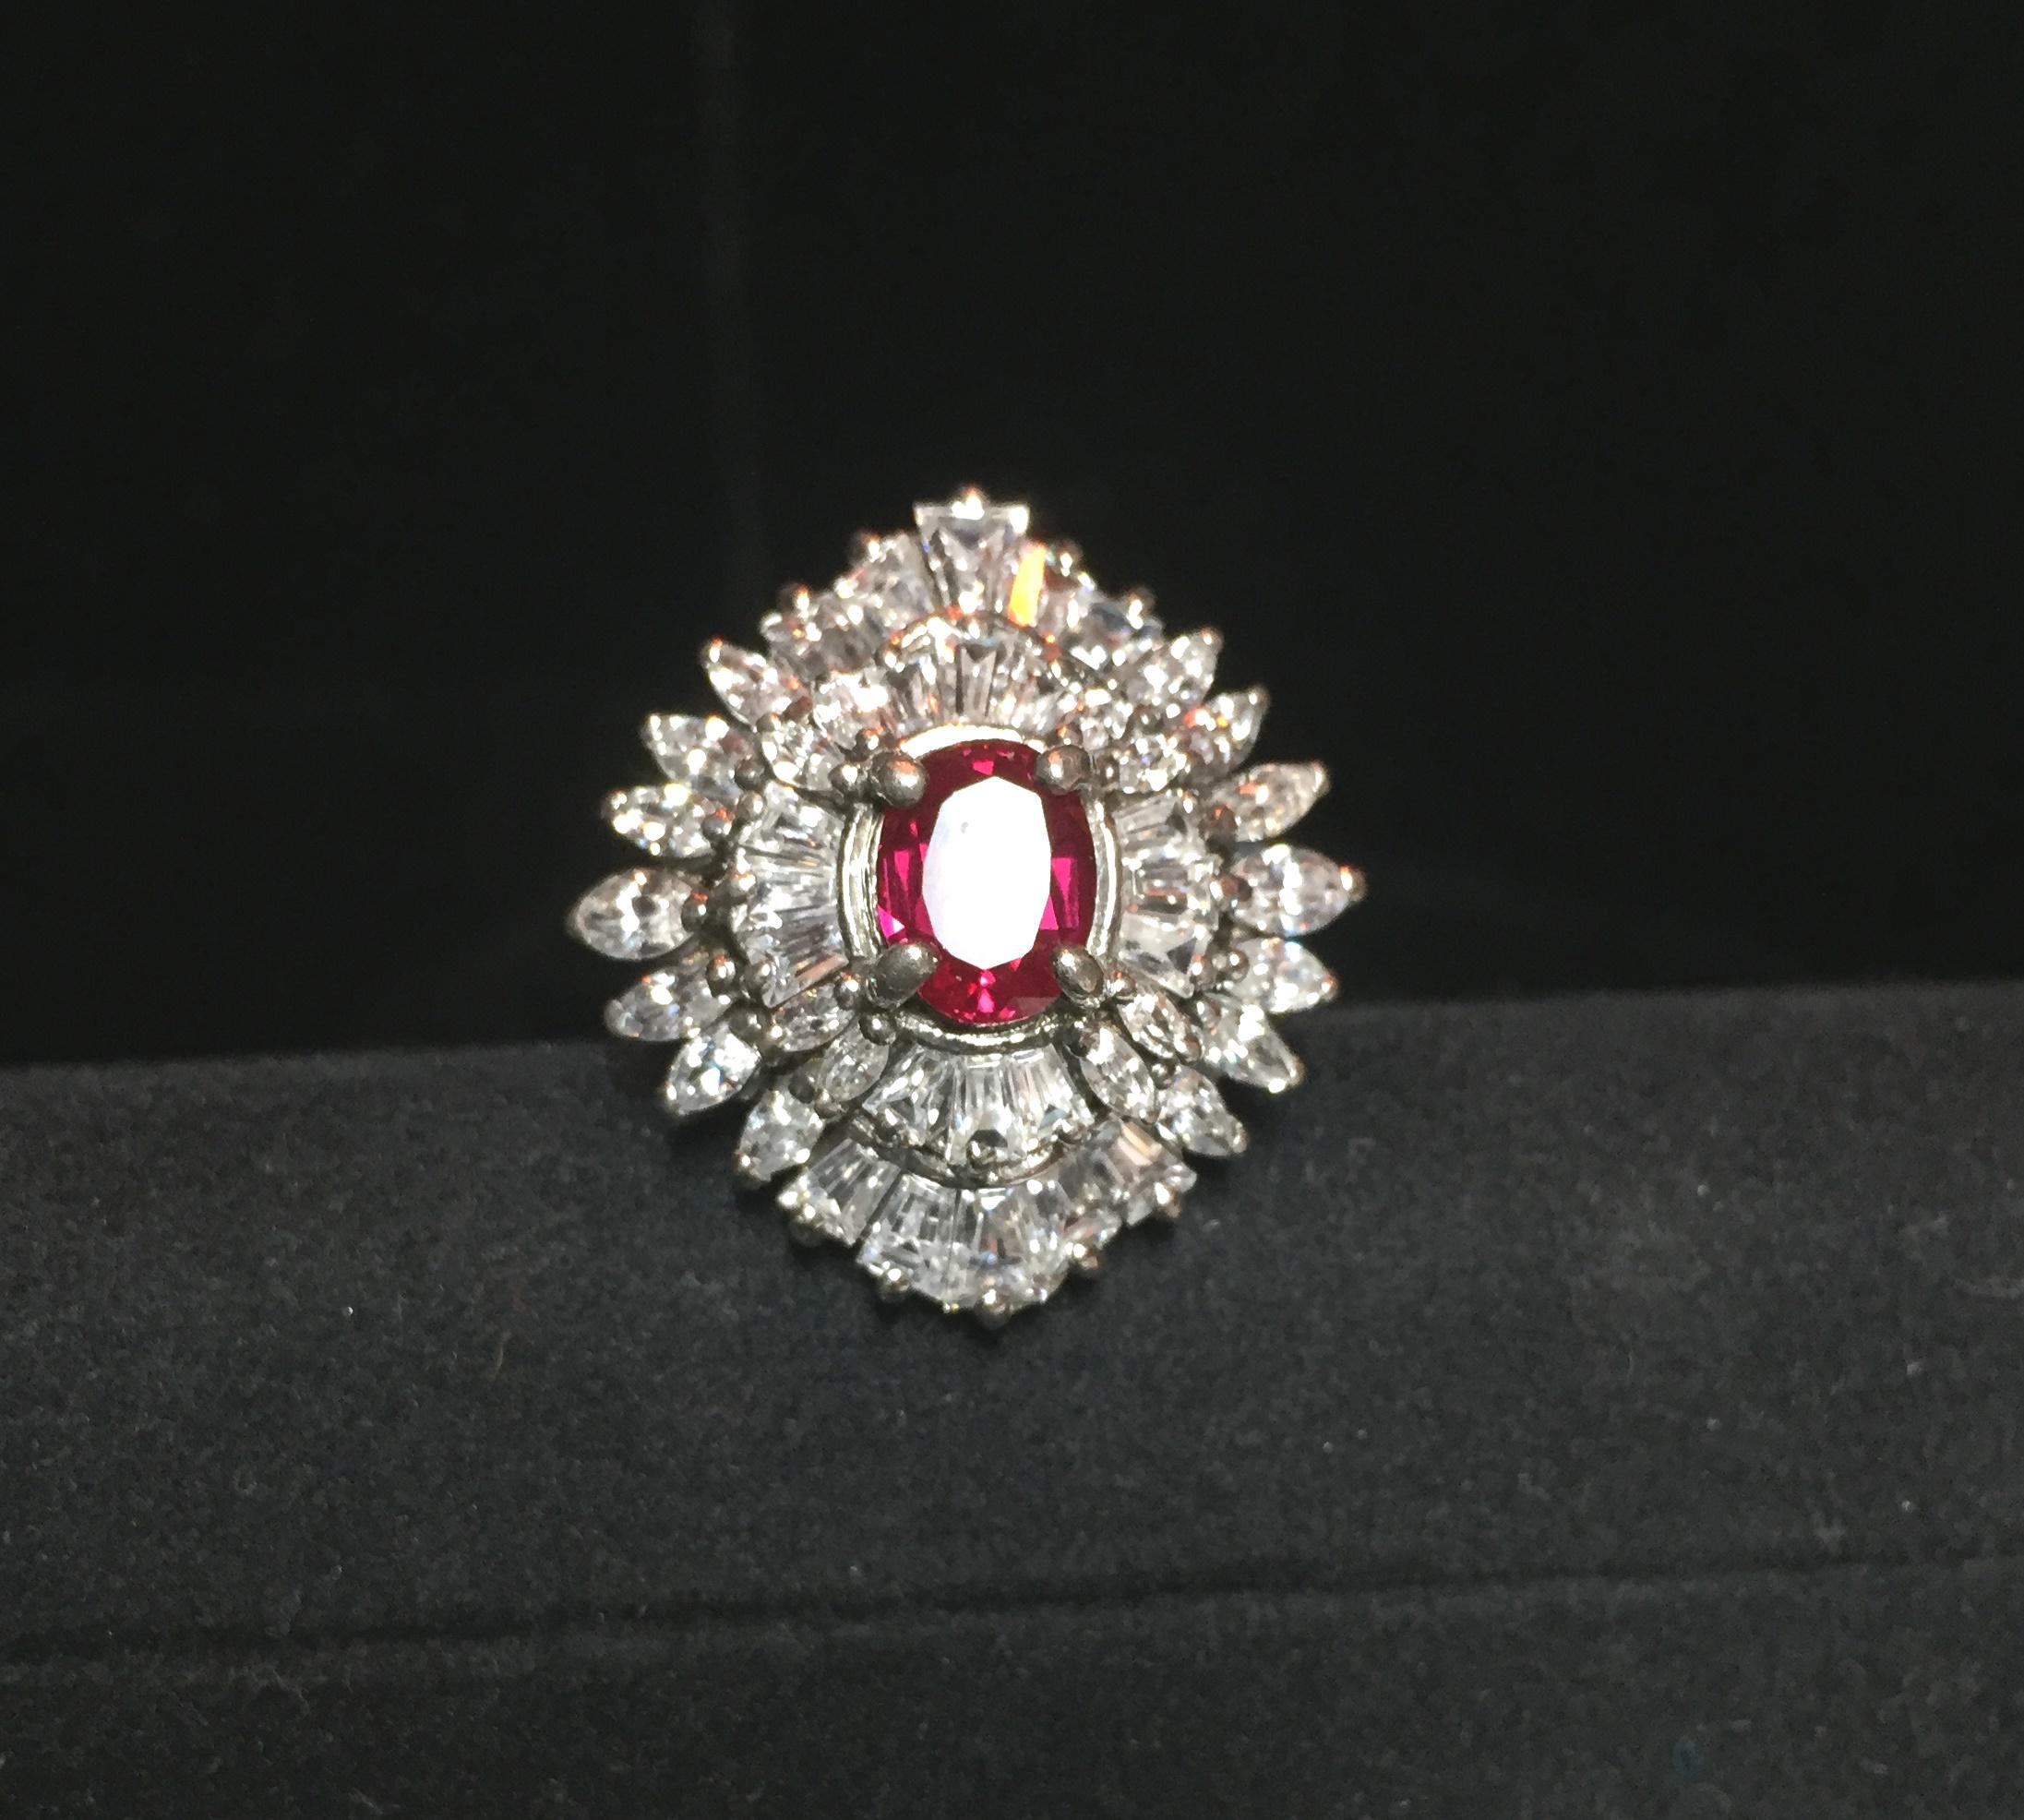 Offered here is an artist-signed sterling silver, cubic zirconia, & synthetic ruby cocktail ring from the 1970s. The traditional stepped design presents two tiers of ice-clear cubic zirconia in marquise and tapered baguette cuts, leading up to a